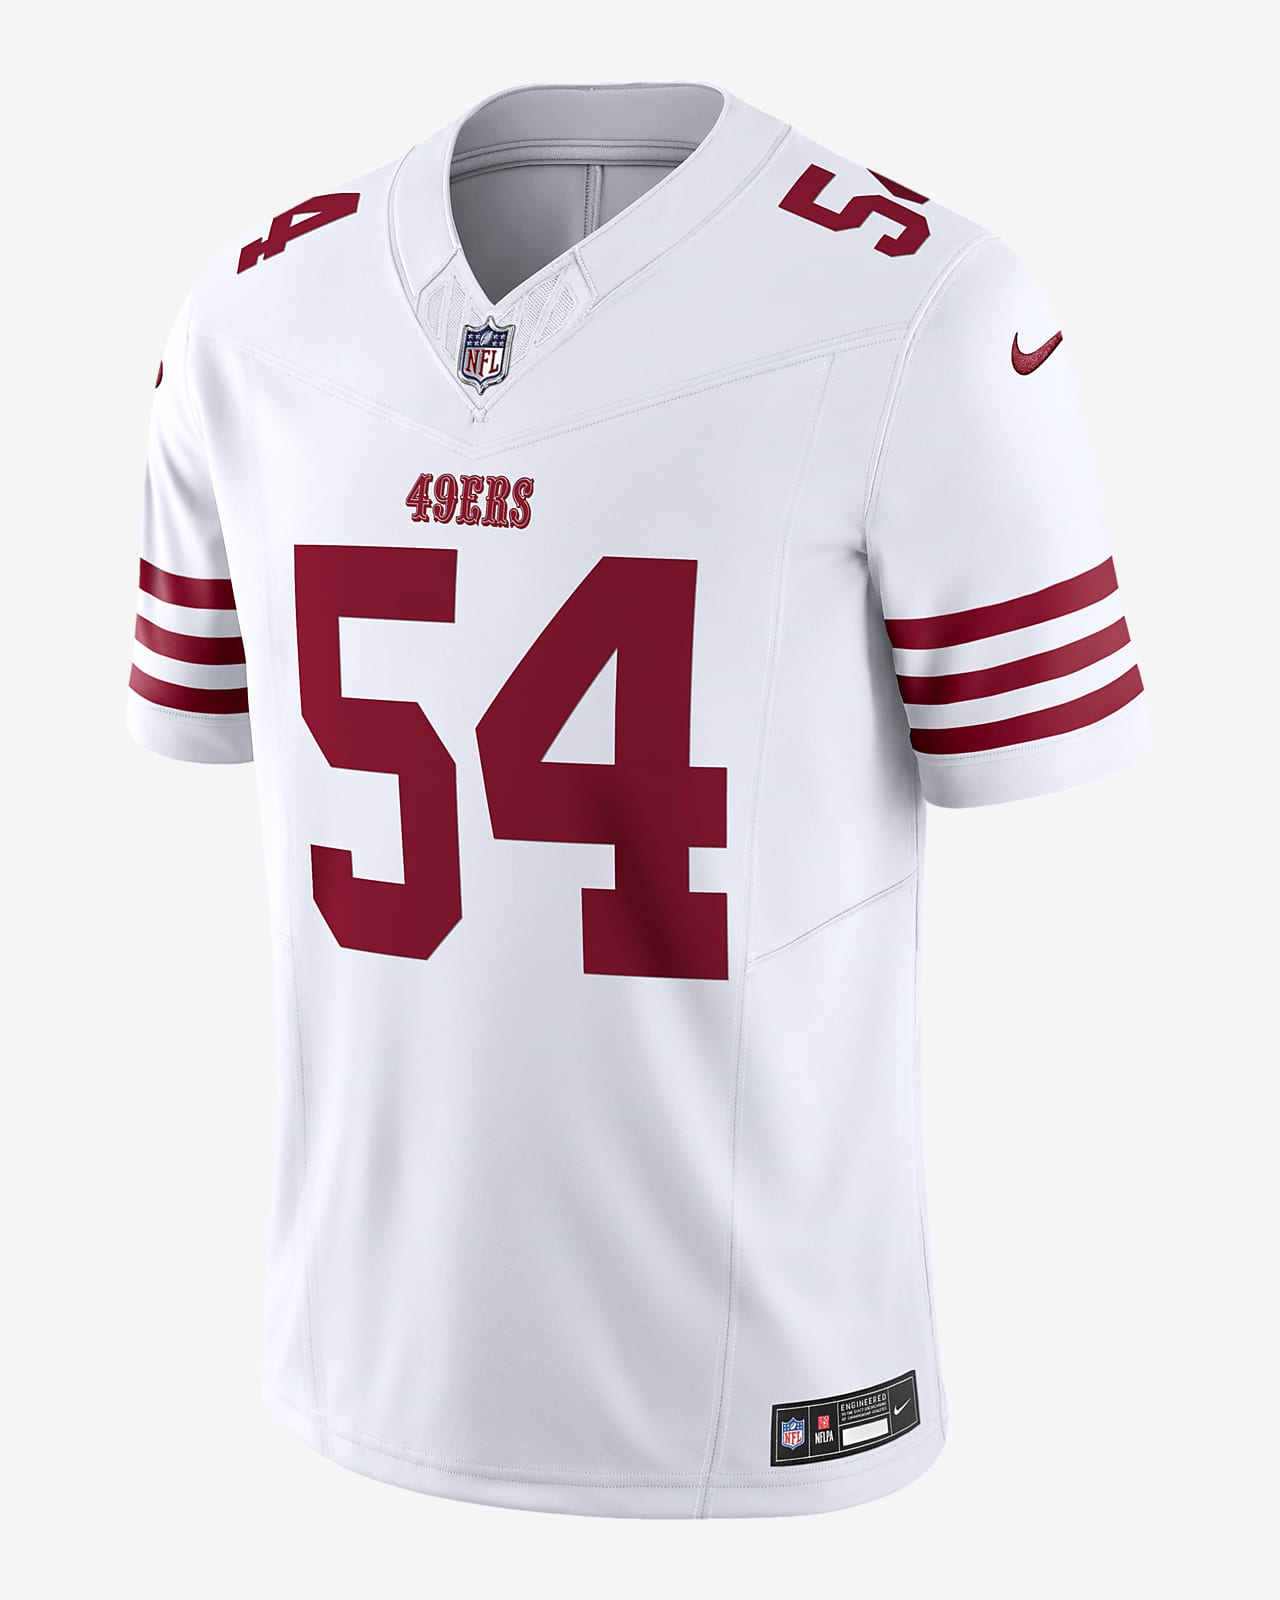 49ers jersey official